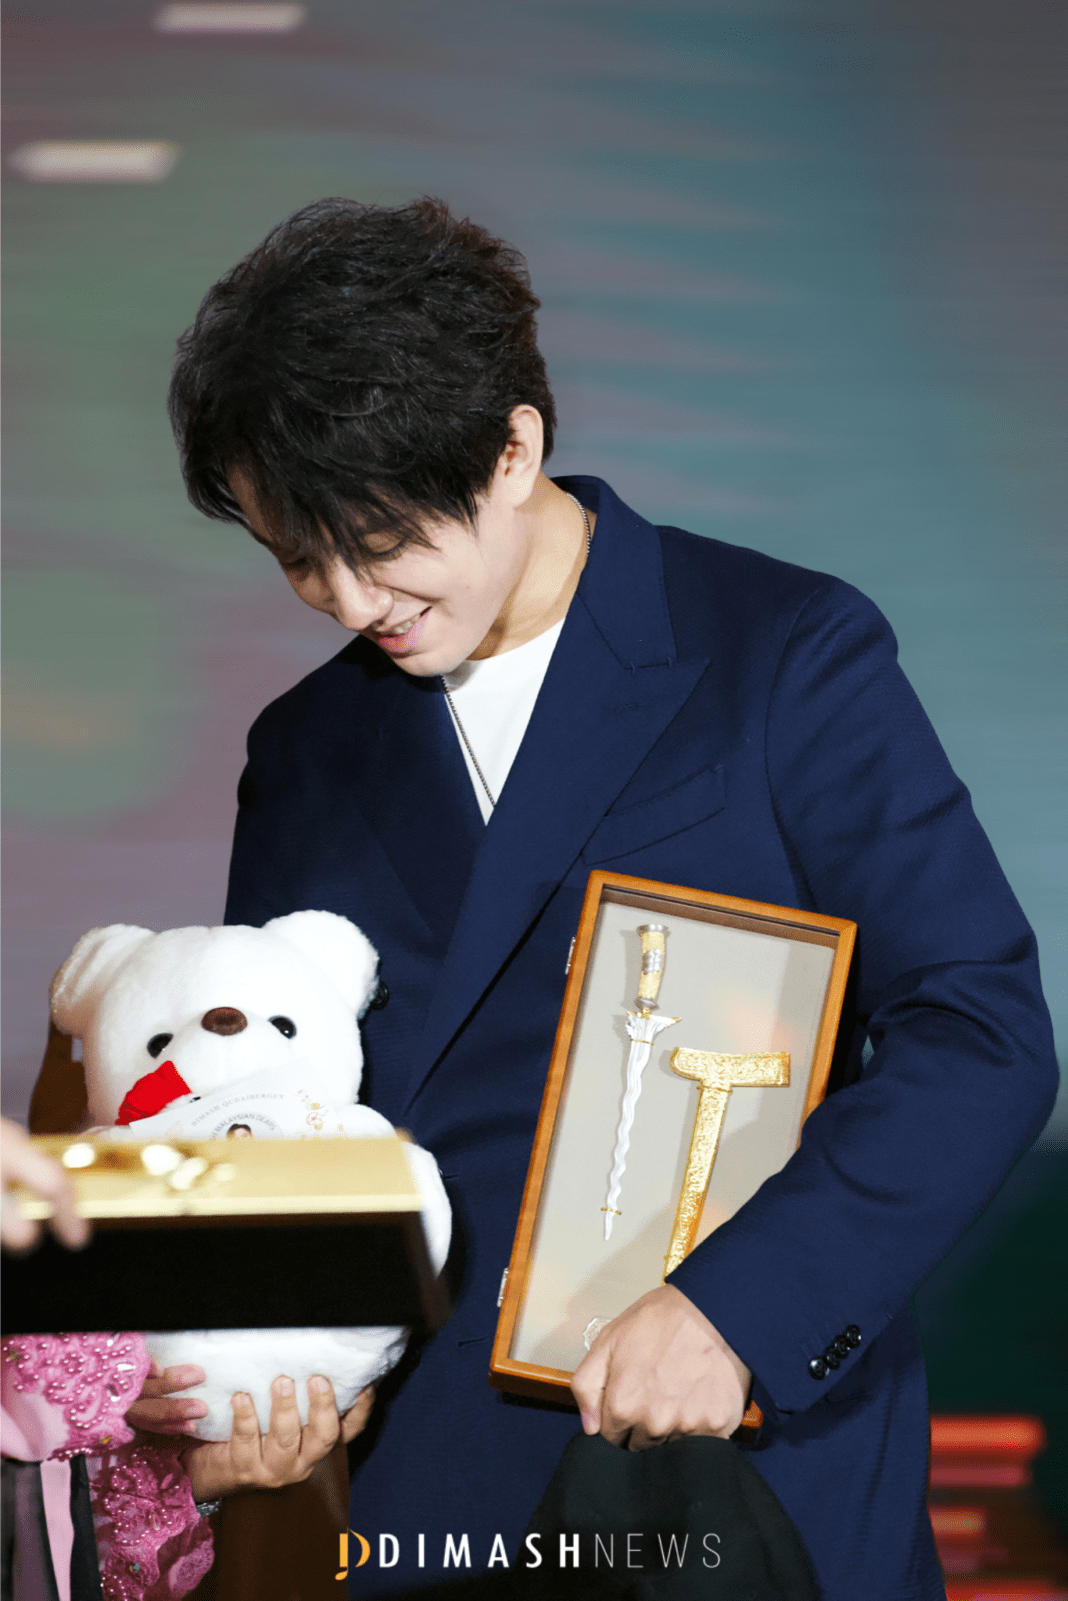 Dimash was awarded a medal for performing arts in Malaysia